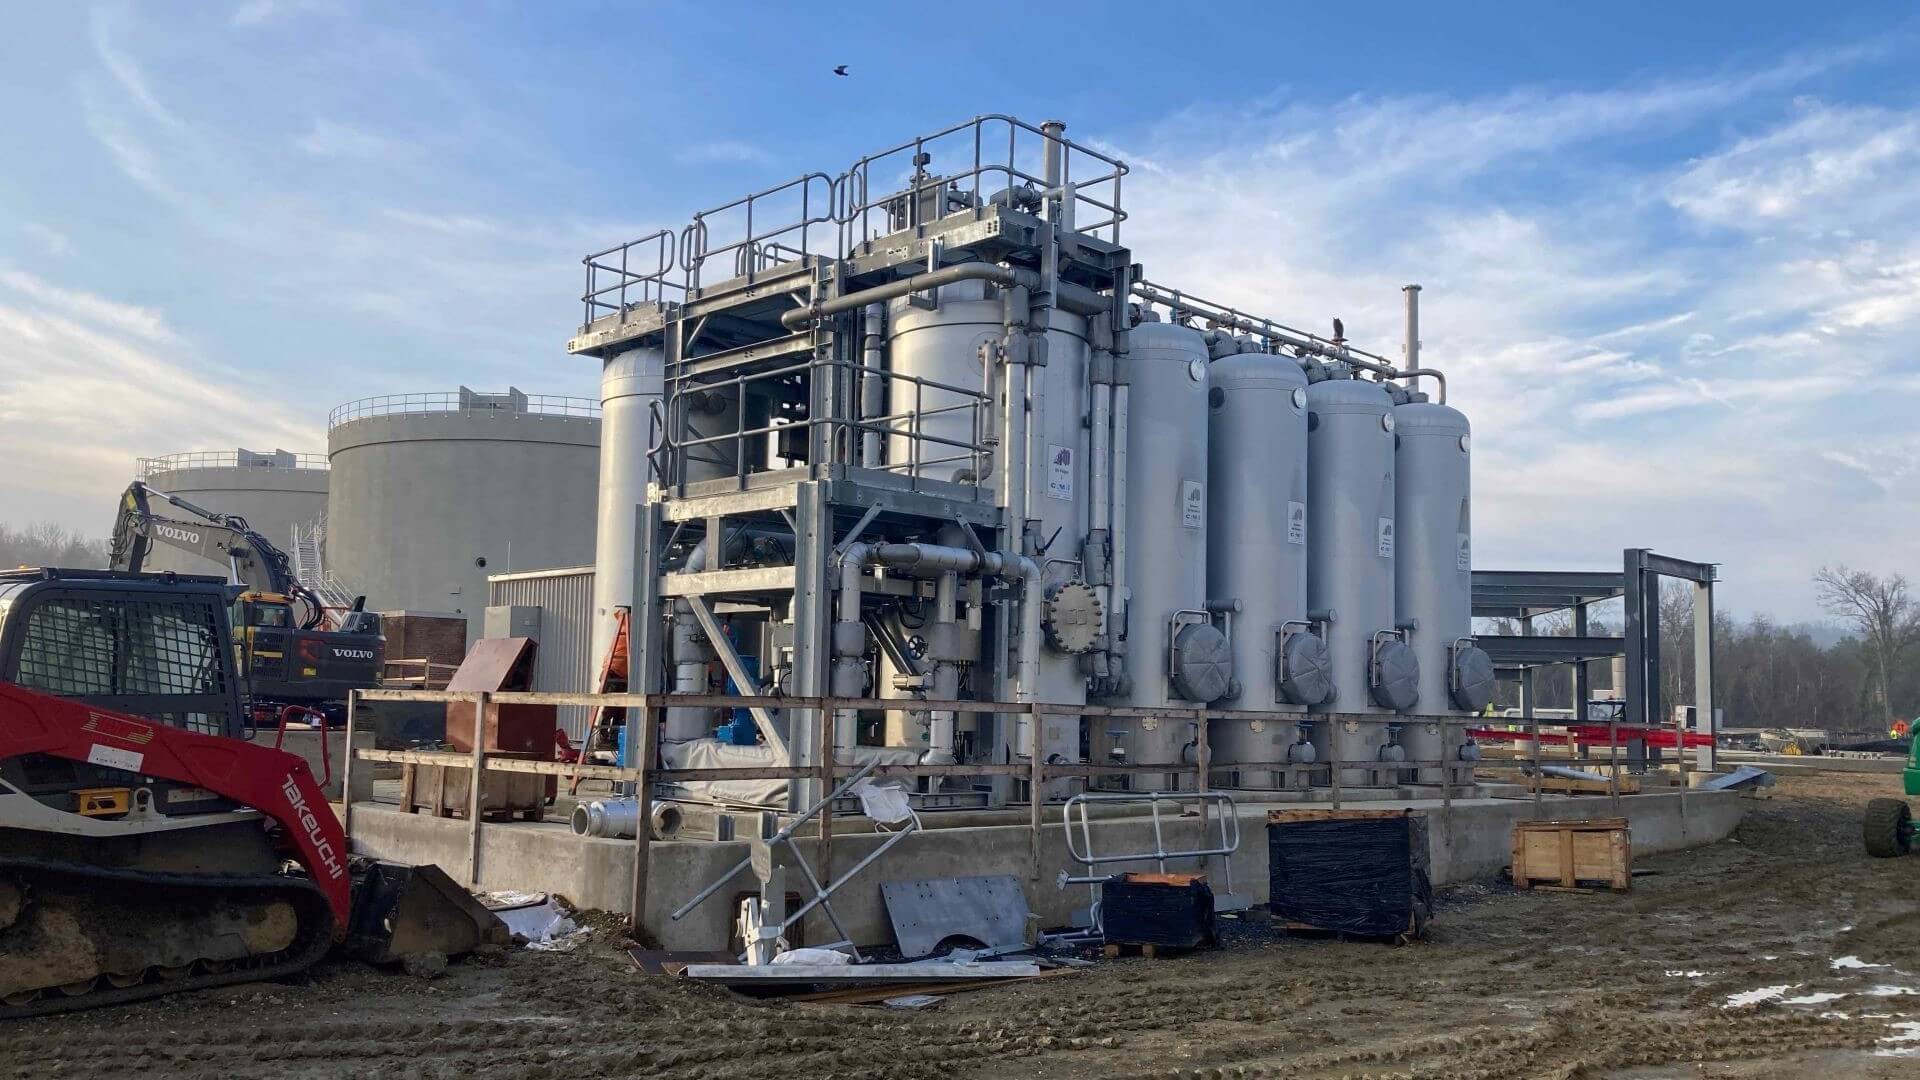 Close up of thermal hydrolysis installation at WSSC’s Piscataway bioenergy project site in Maryland, US